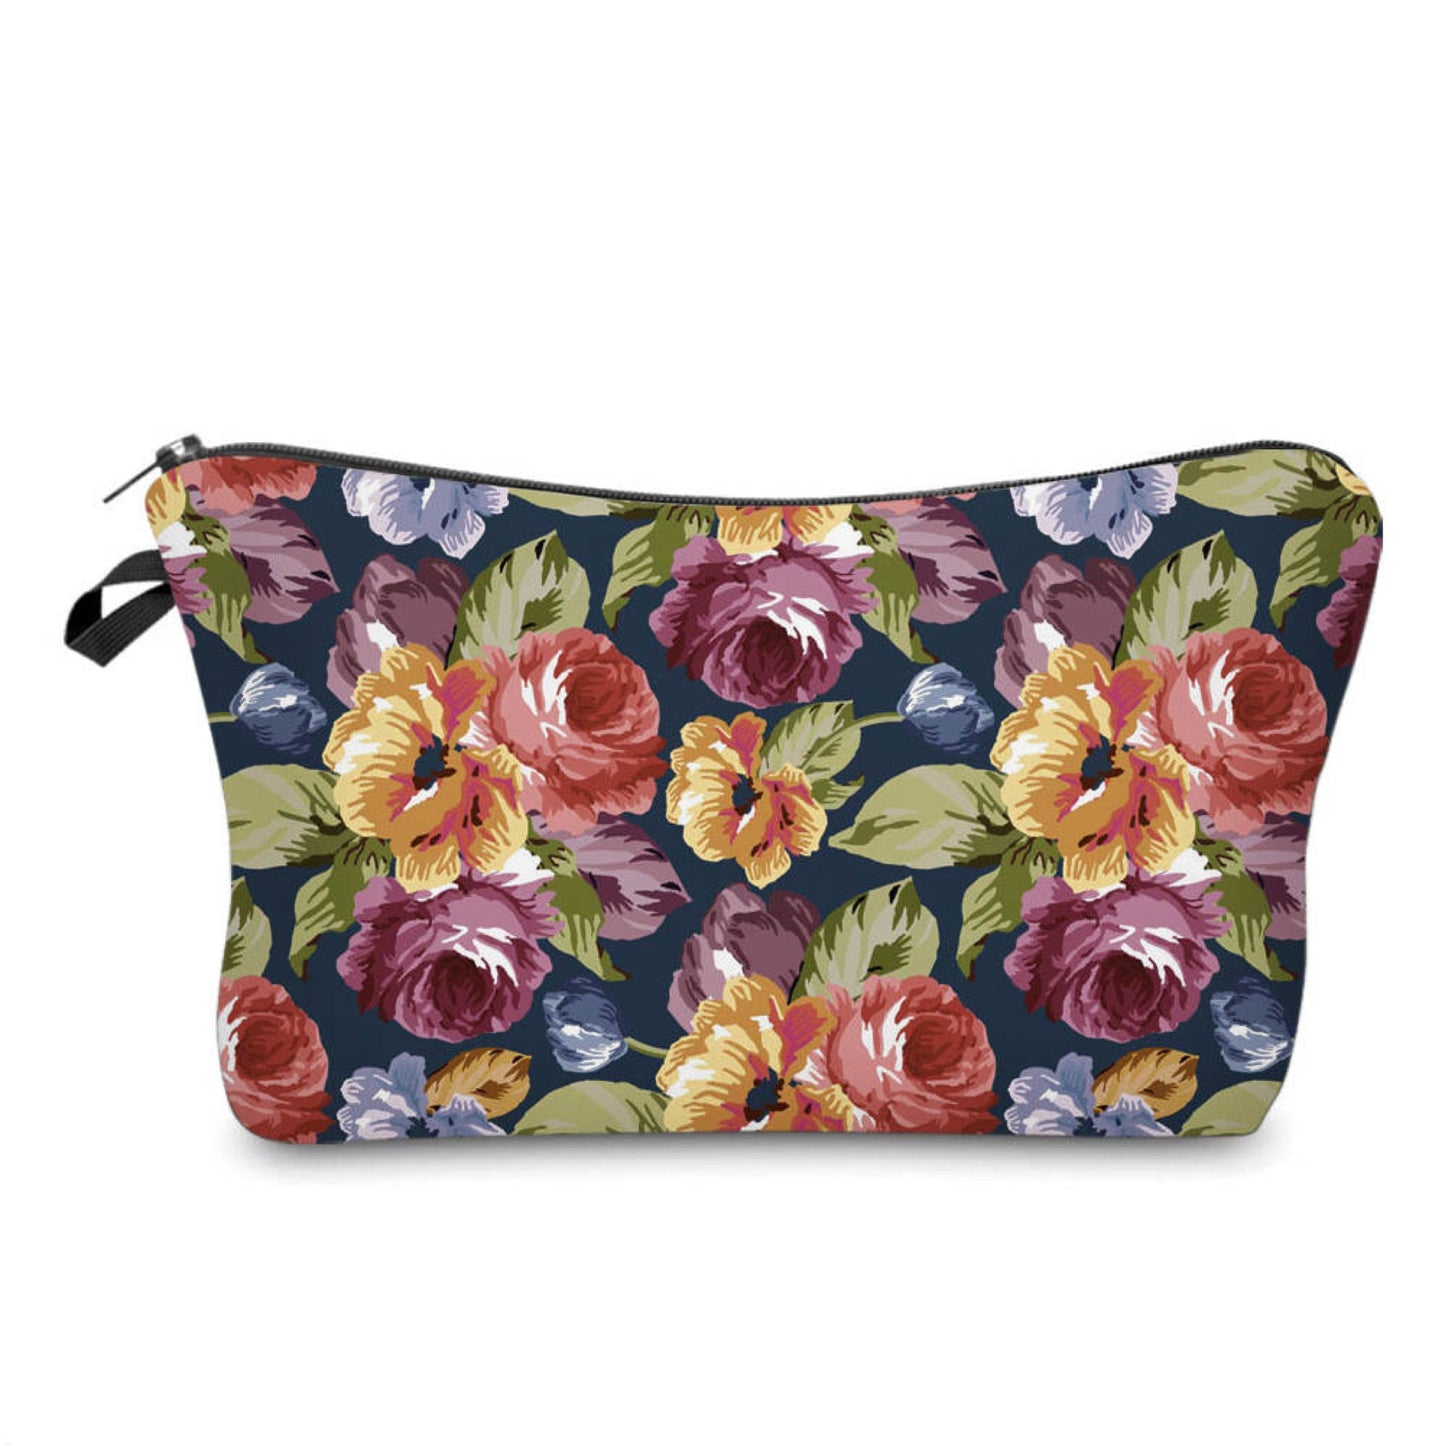 Pouch - Floral, Navy Roses